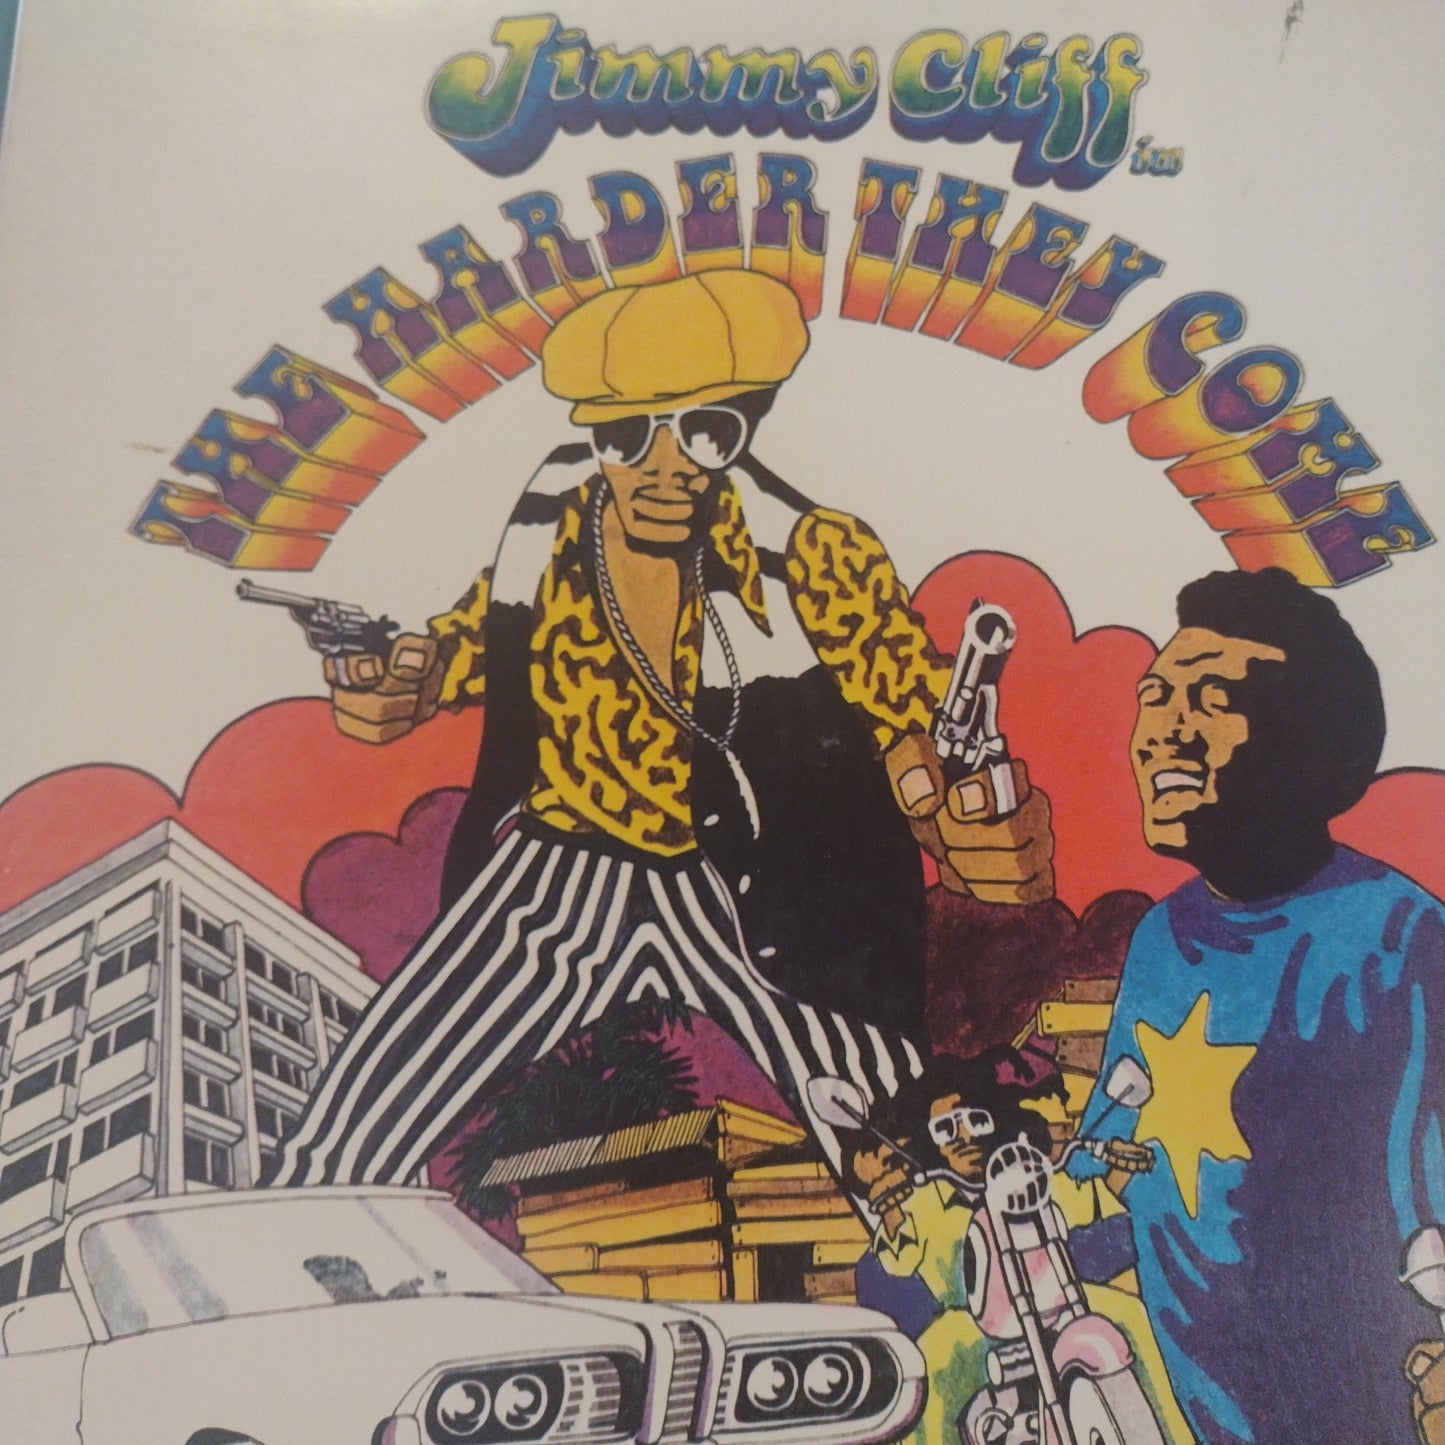 The harder they come jimmy cliff lp